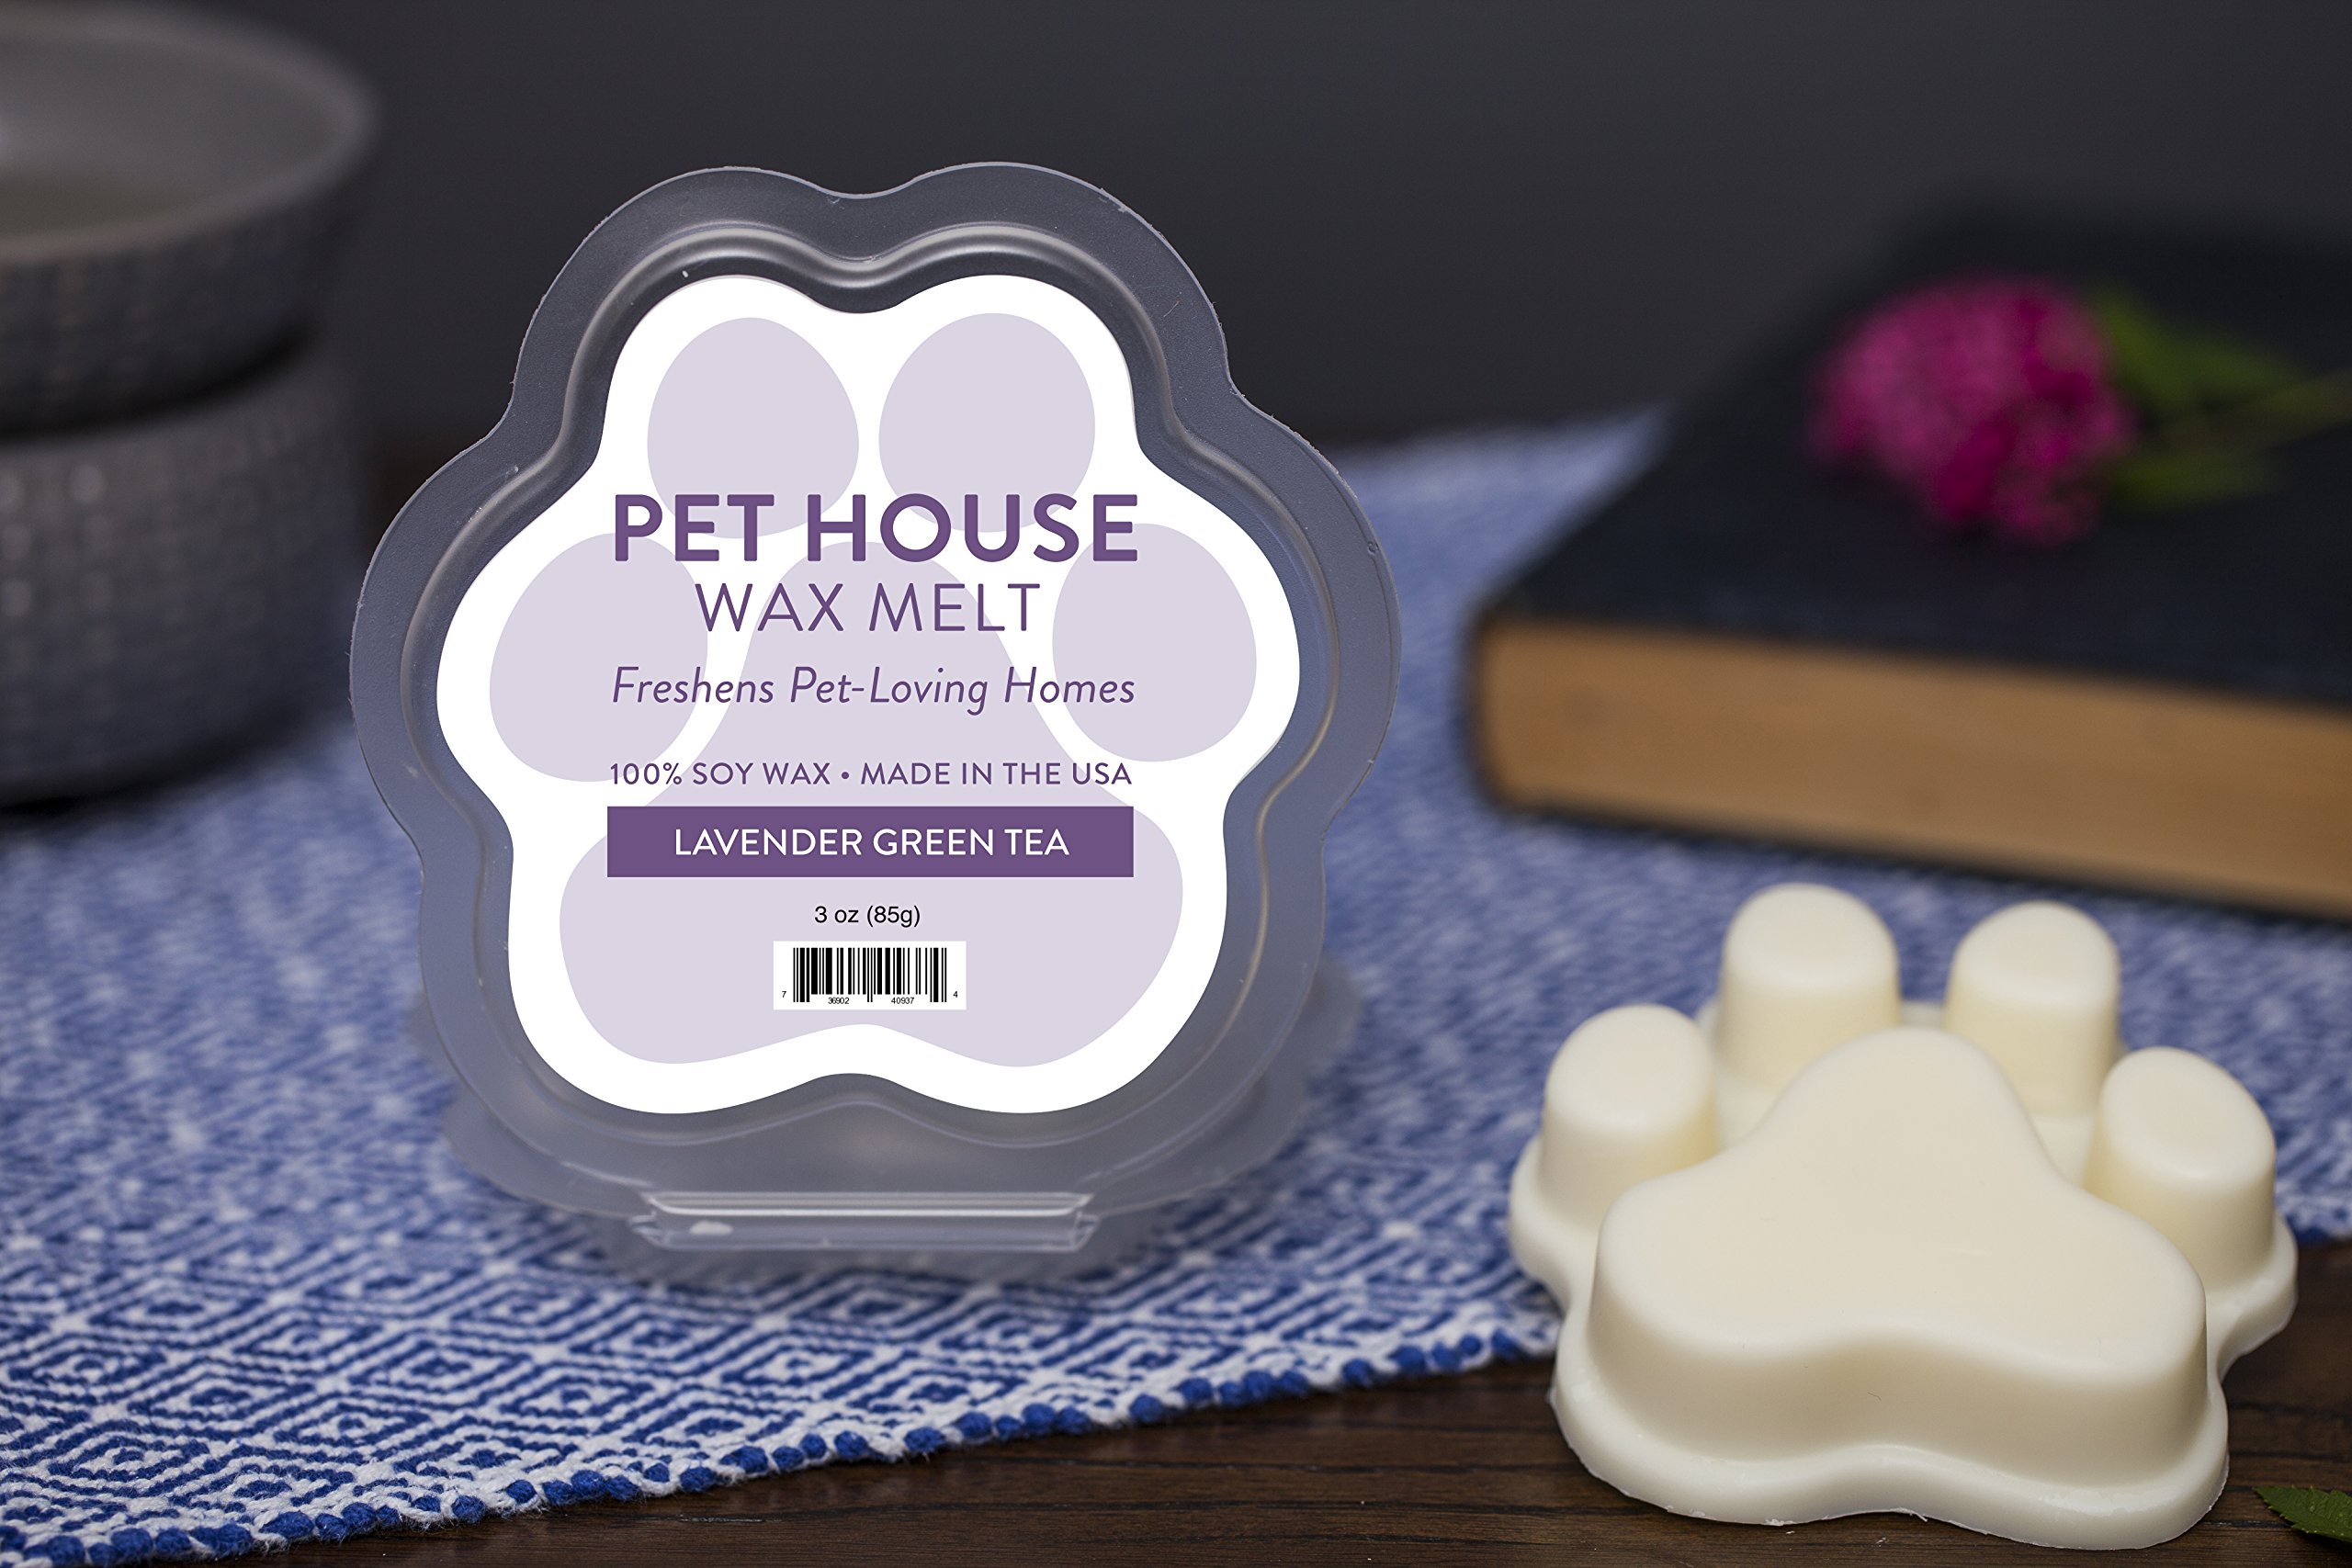 One Fur All 100% Natural Plant-Based Wax Melts, Pack of 2 by Pet House – Long Lasting Pet Odor Eliminating Wax Melts Non-Toxic, Dye-Free Unique, Made in USA - (Pack of 2, Lavender Green Tea)